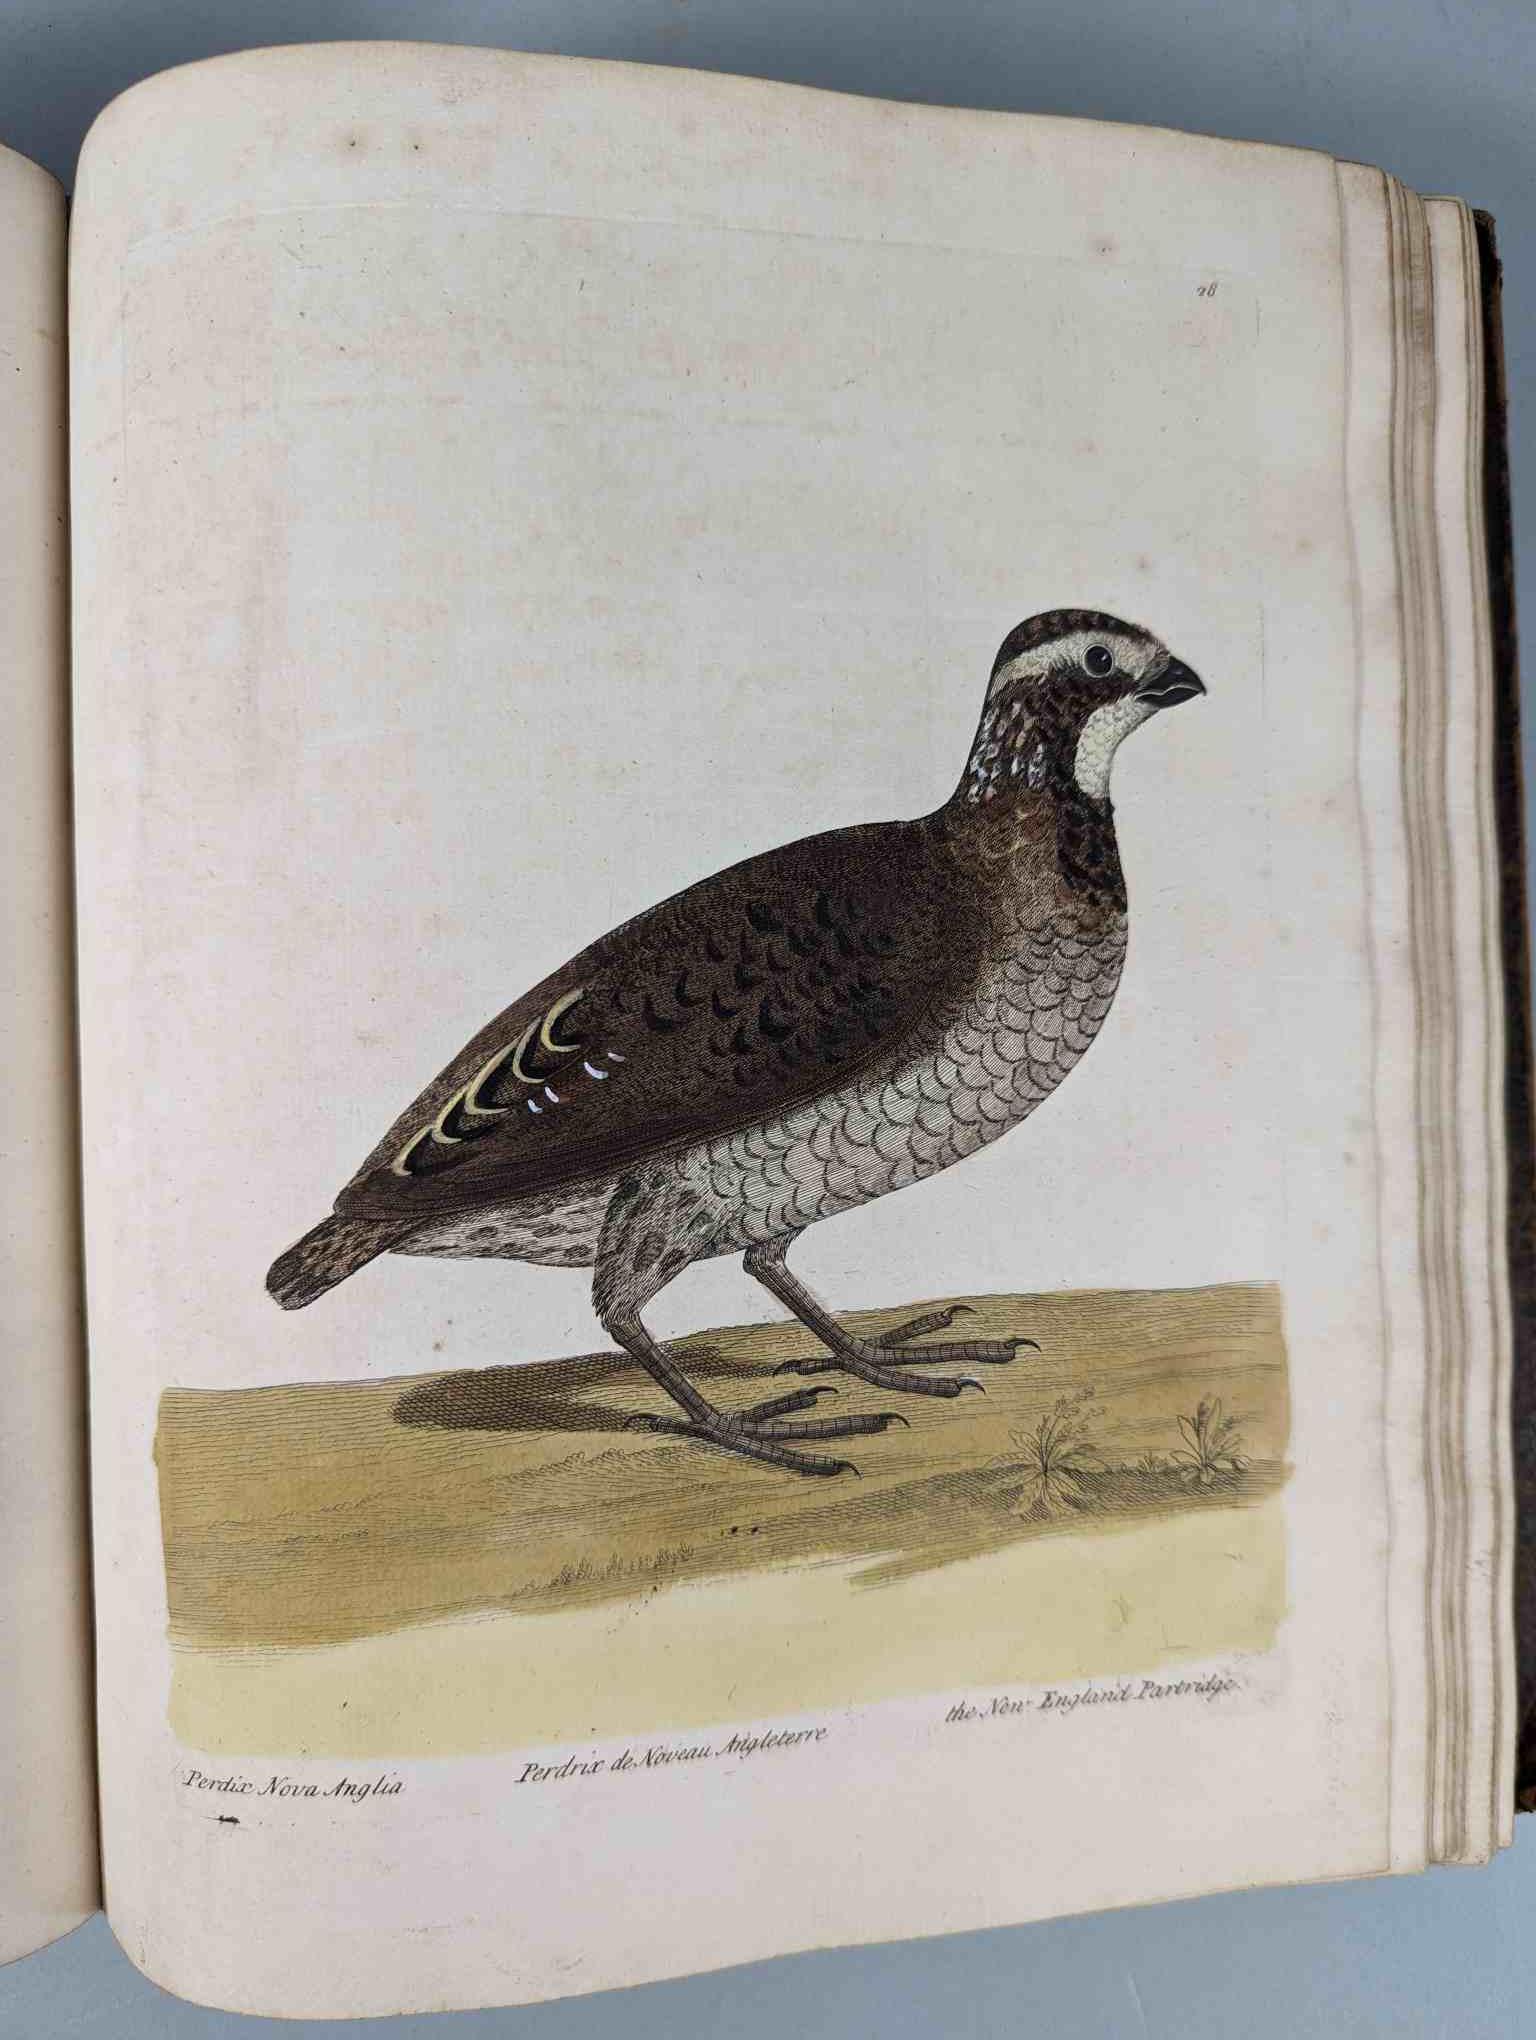 ALBIN, Eleazar. A Natural History of Birds, to which are added, Notes and Observations by W. - Image 31 of 208